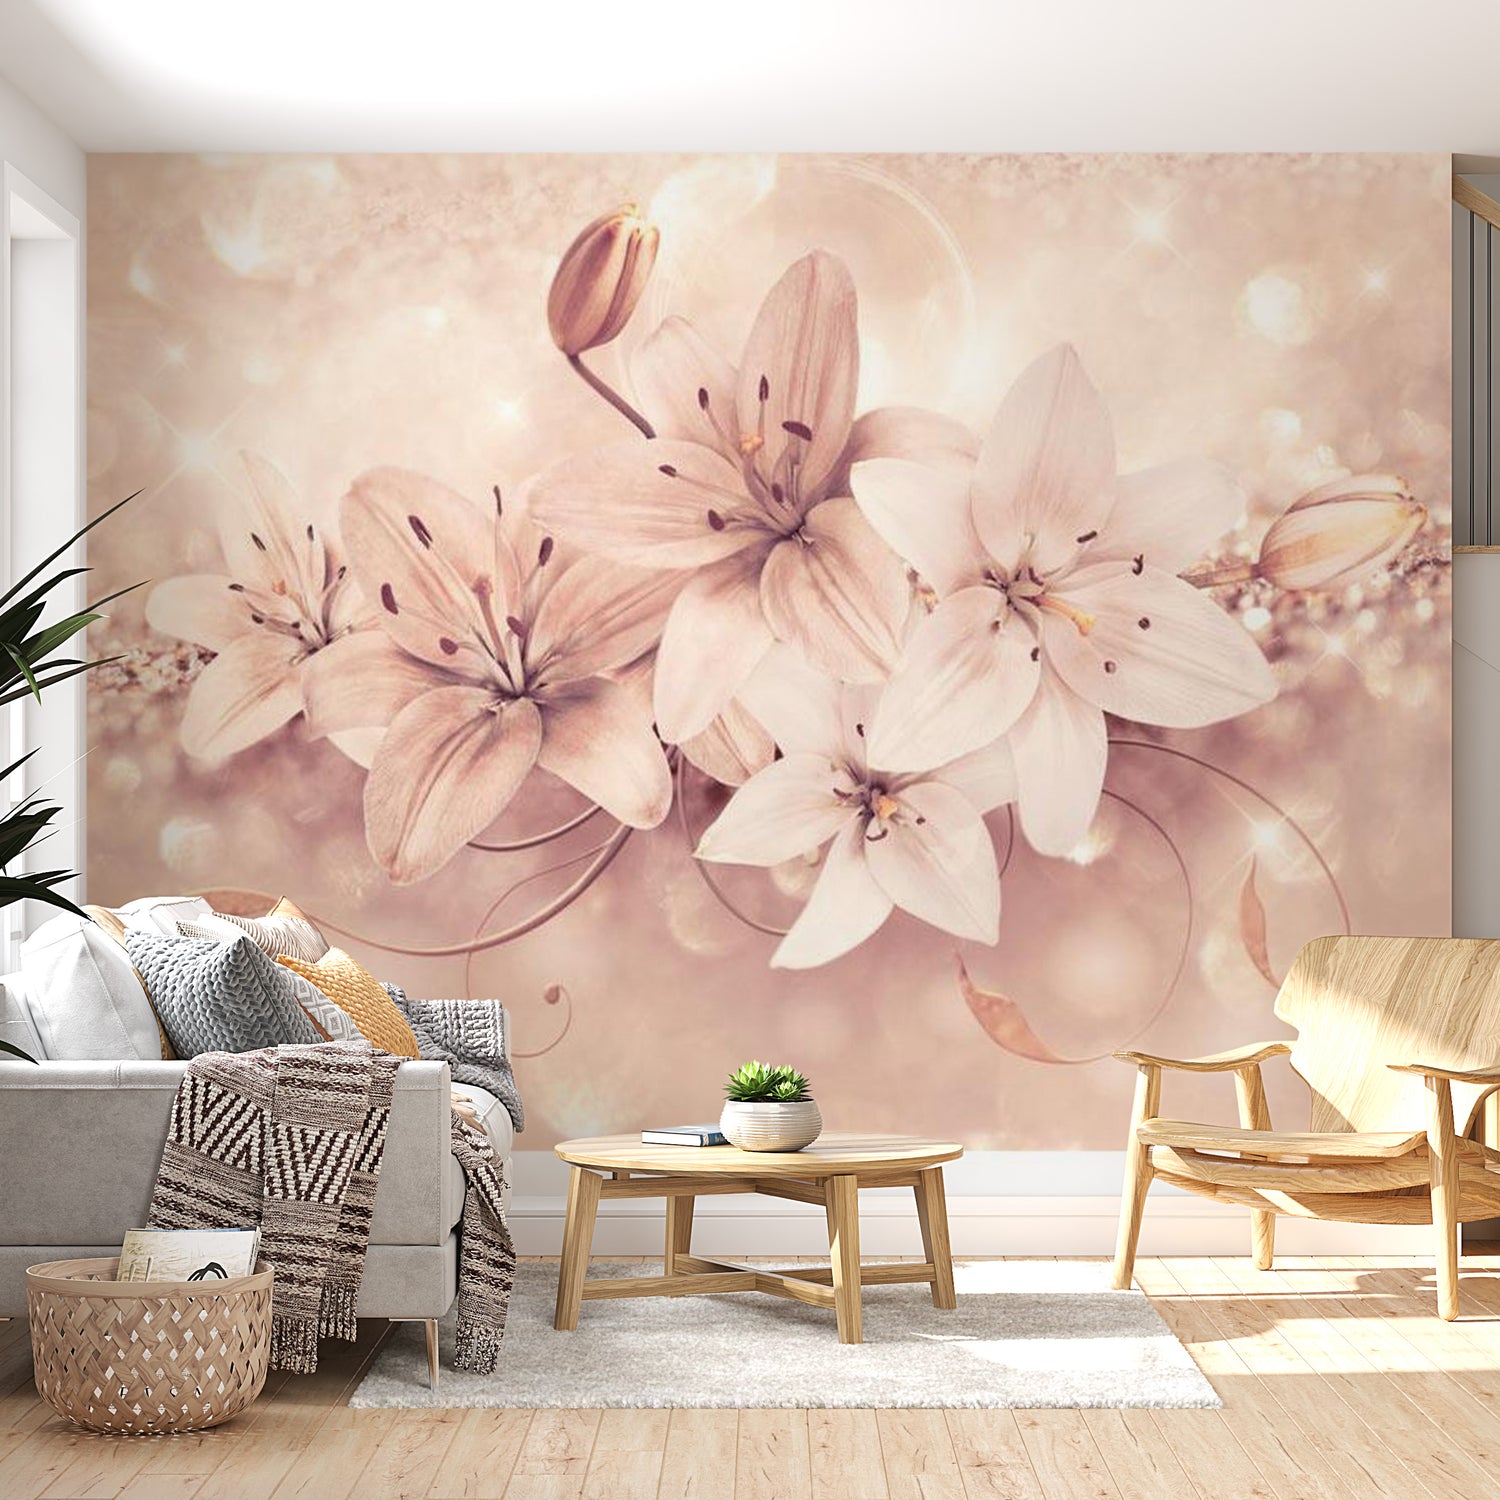 Peel & Stick Floral Wall Mural - Jewels Of Light - Removable Wall Decals